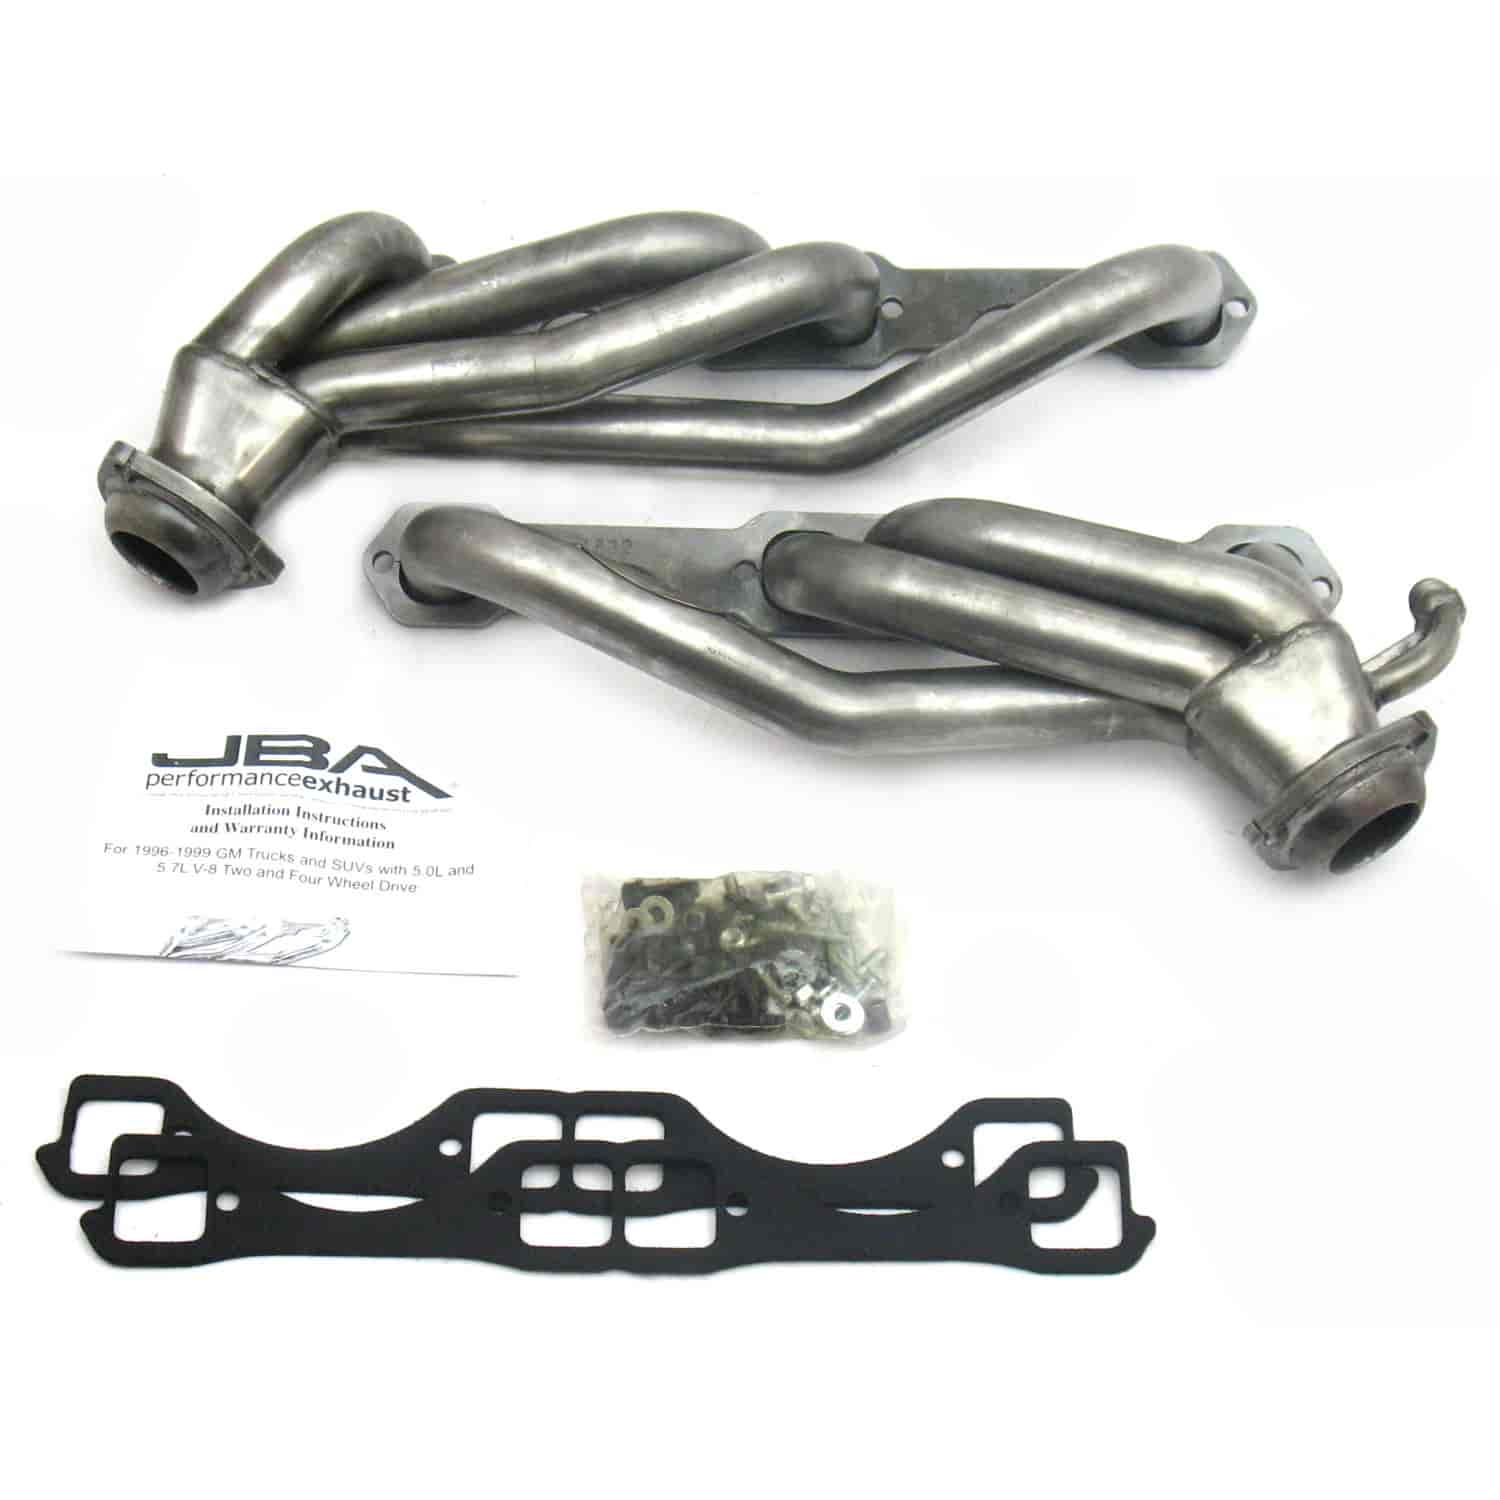 1832S Shorty Headers for 1996-2000 GM Trucks, SUVs w/5.0L & 5.7L Engines [w/o Air Injection]